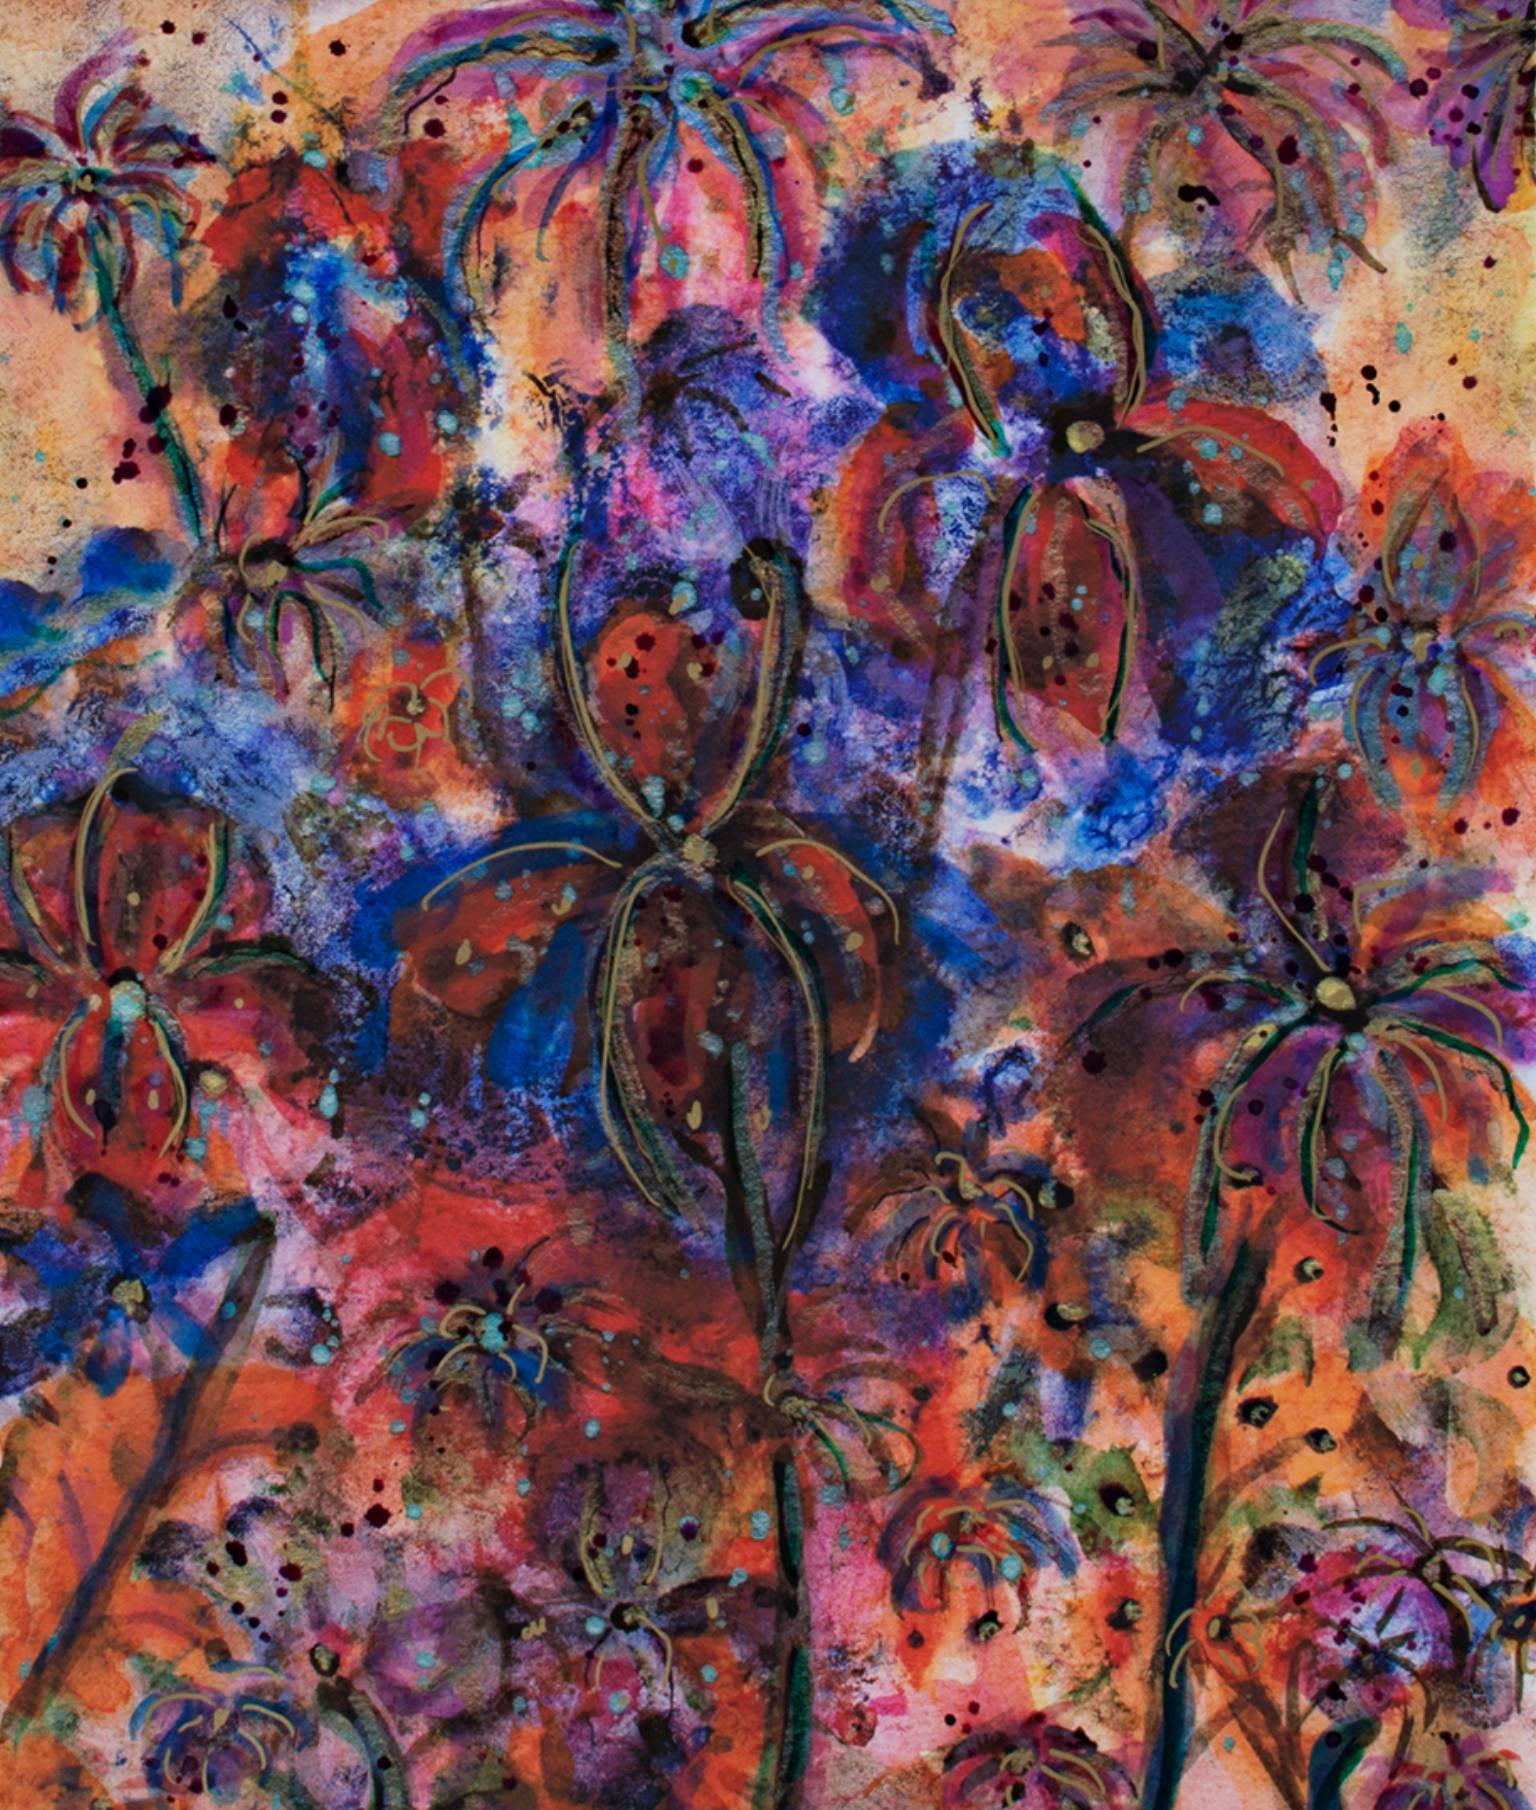 "Sunlit Tropical Orchids I" is a mixed media piece signed lower right by the artist David Barnett. It includes multiple brightly-colored orchids with expressive marks.

22 1/8" x 15 7/8" art
32 5/8" x 26 1/8" framed

David Barnett was born and